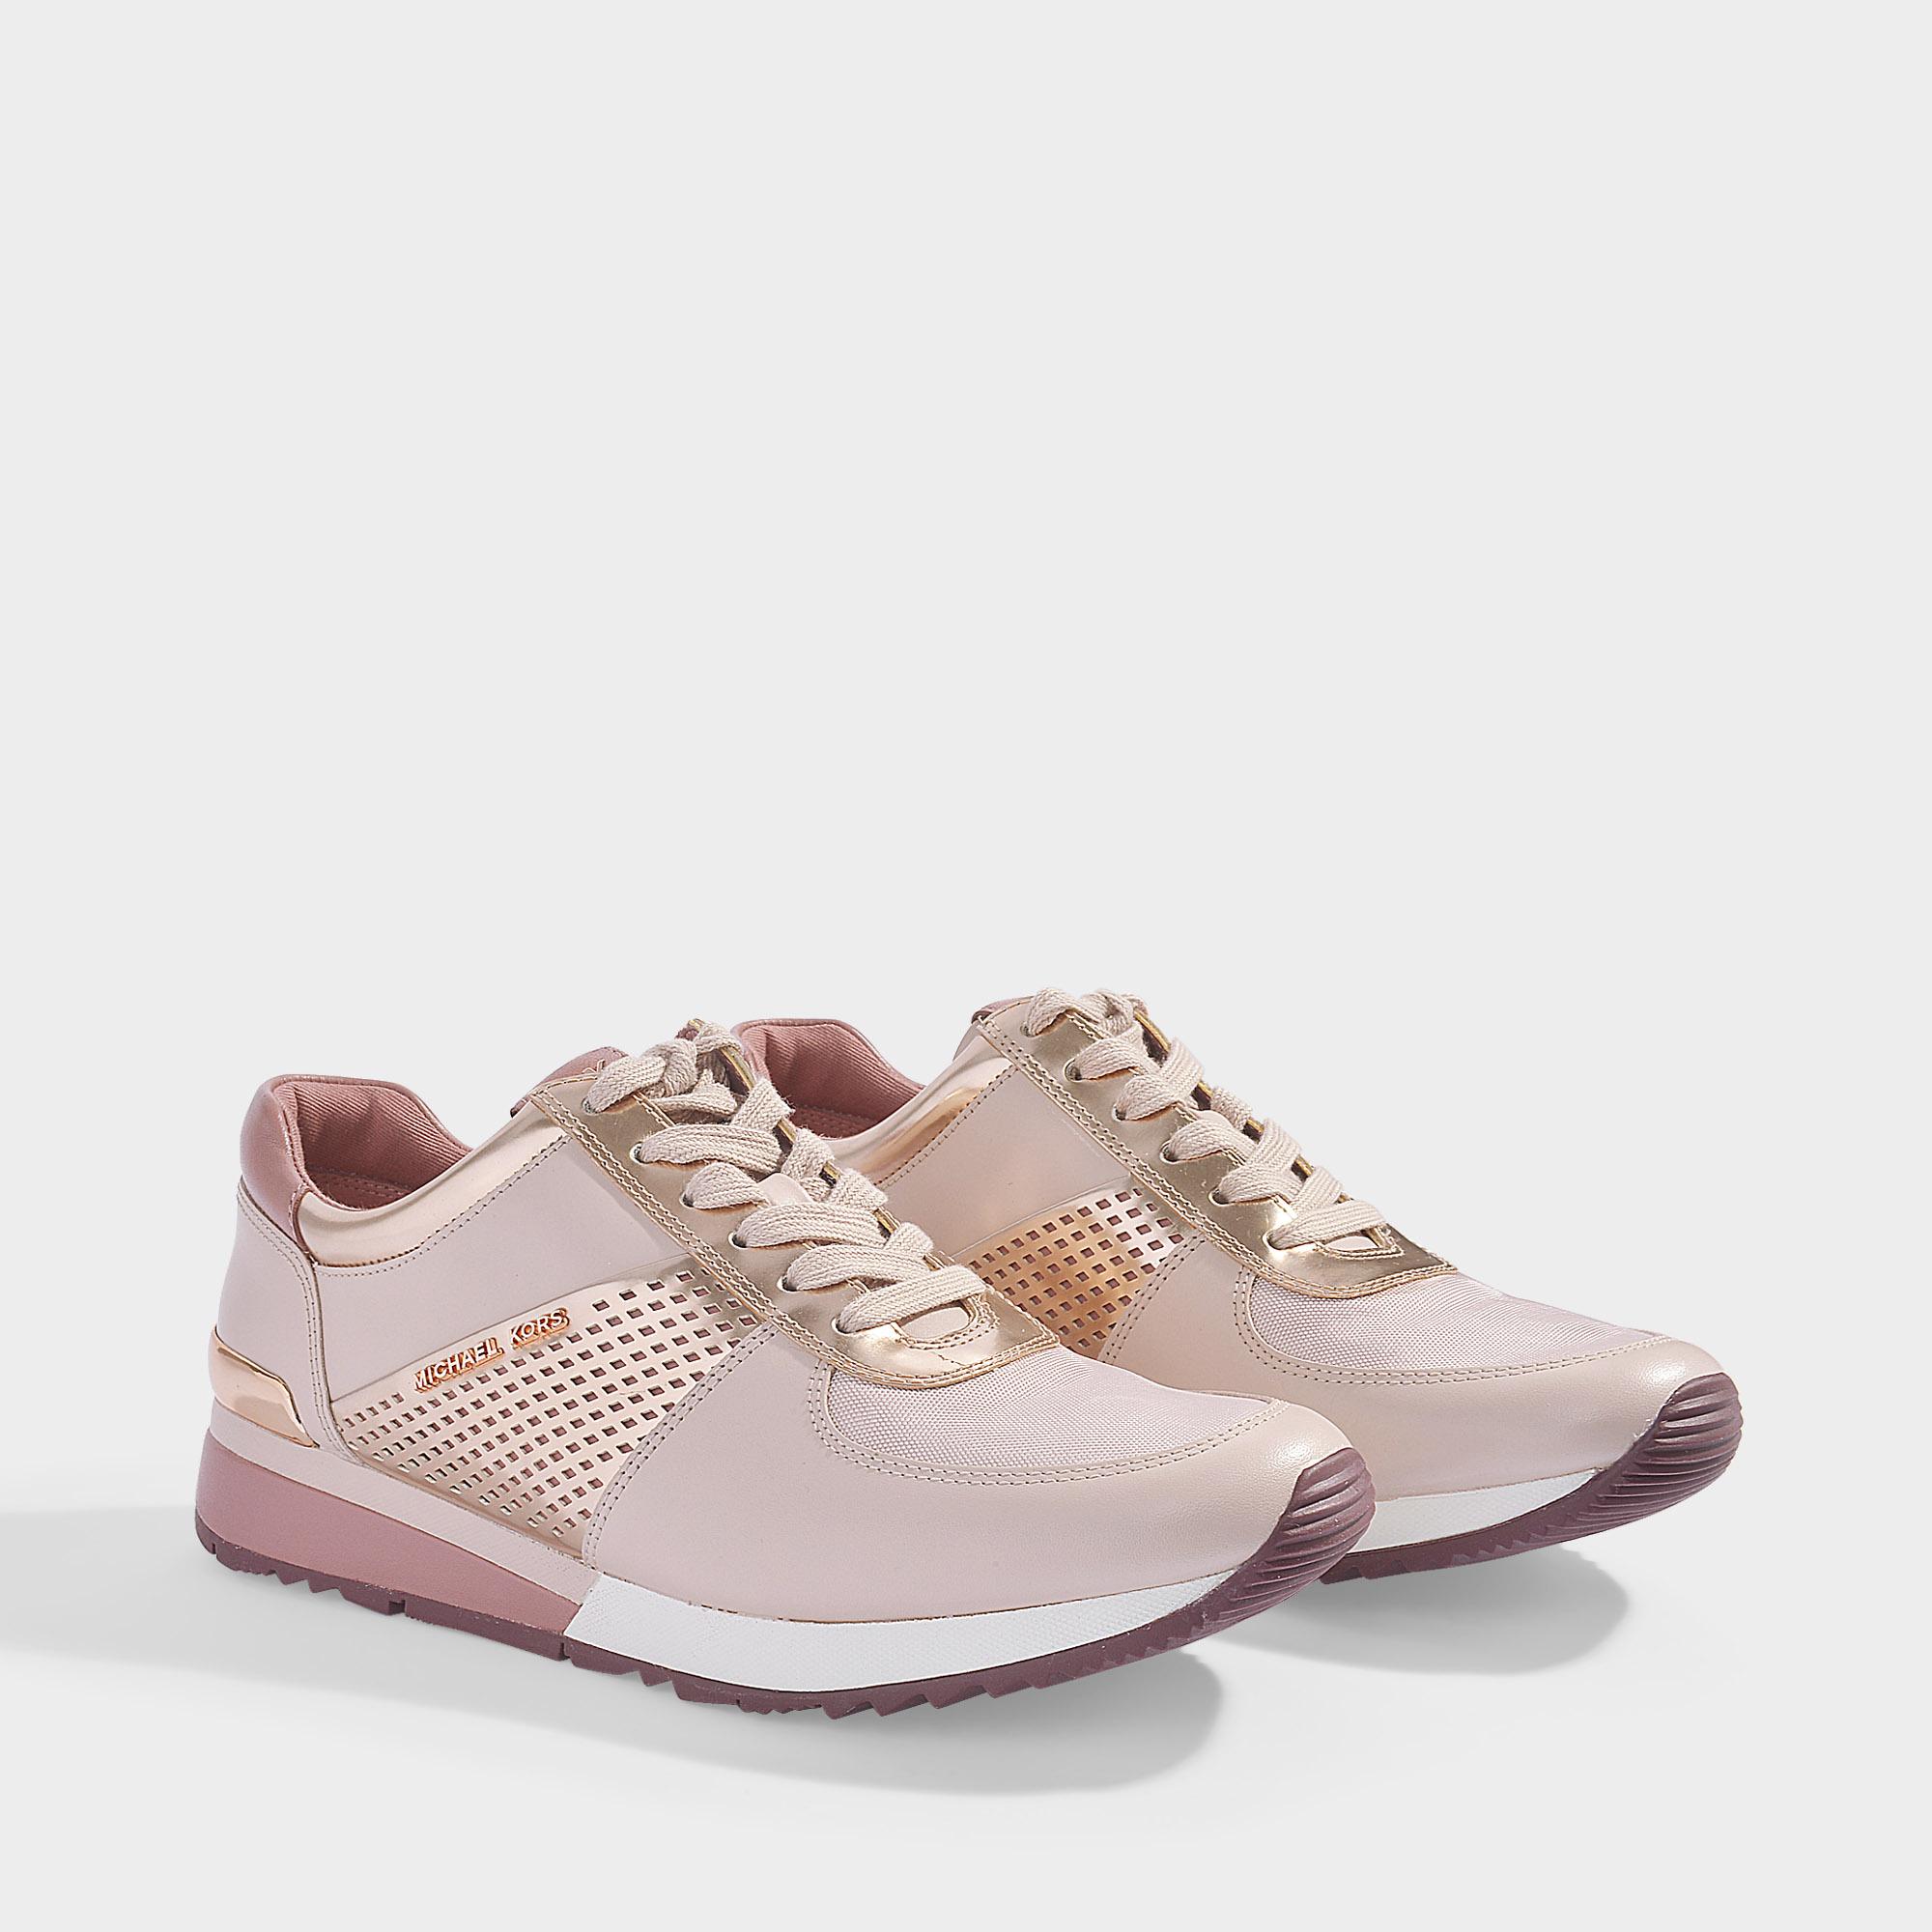 Michael Kors Allie Trainer Wrap Sneakers In Soft Pink Leather, Mirror  Metallic Diamond Perforated Material And Nappa - Lyst